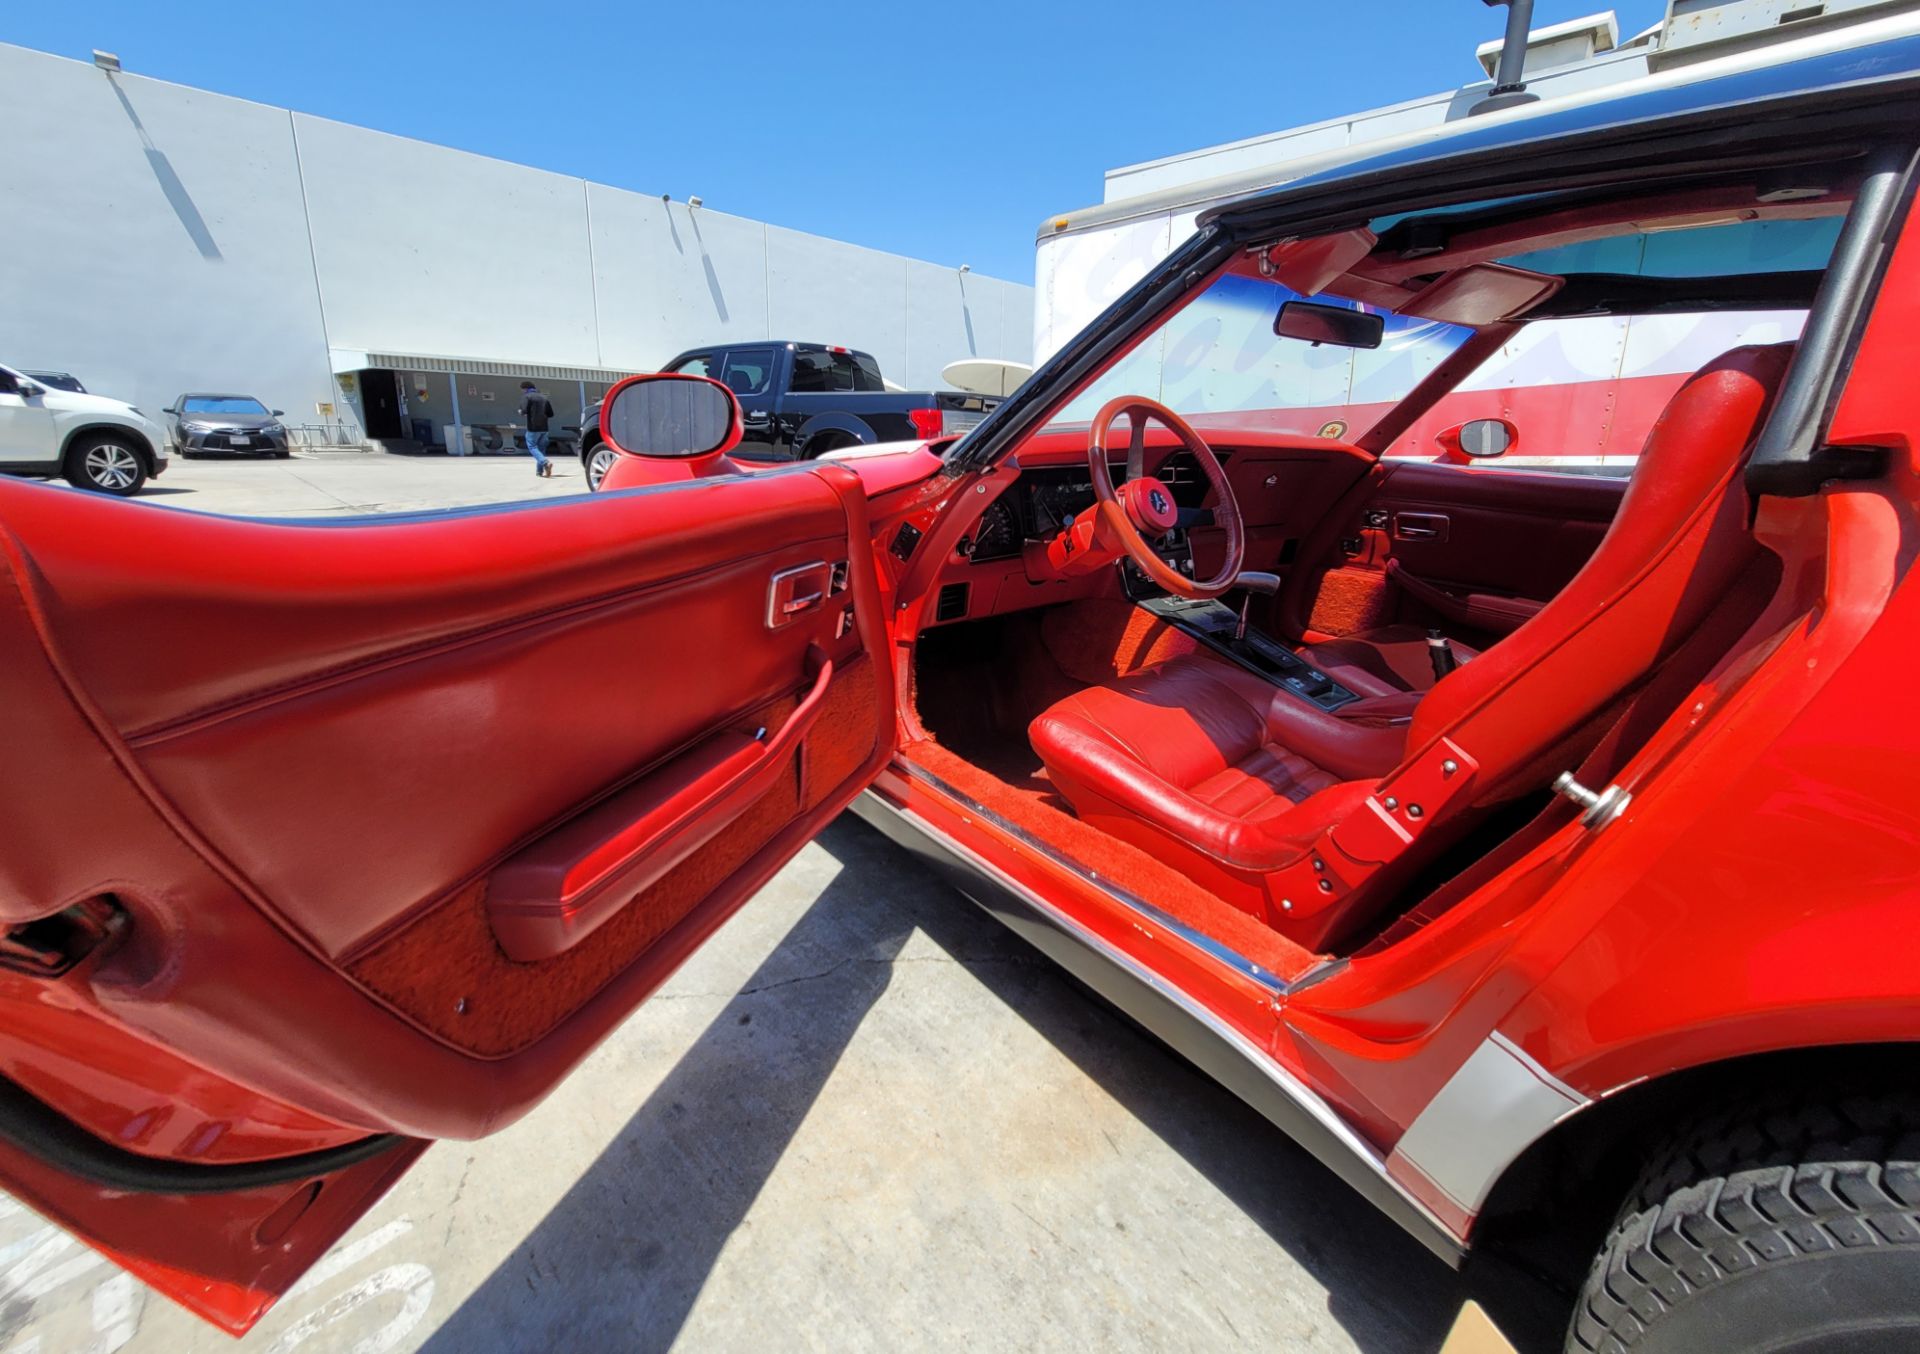 1980 CHEVROLET CORVETTE, WAS VIC EDELBROCK'S PERSONAL CAR BOUGHT FOR R&D, RED INTERIOR, TITLE ONLY. - Image 17 of 70